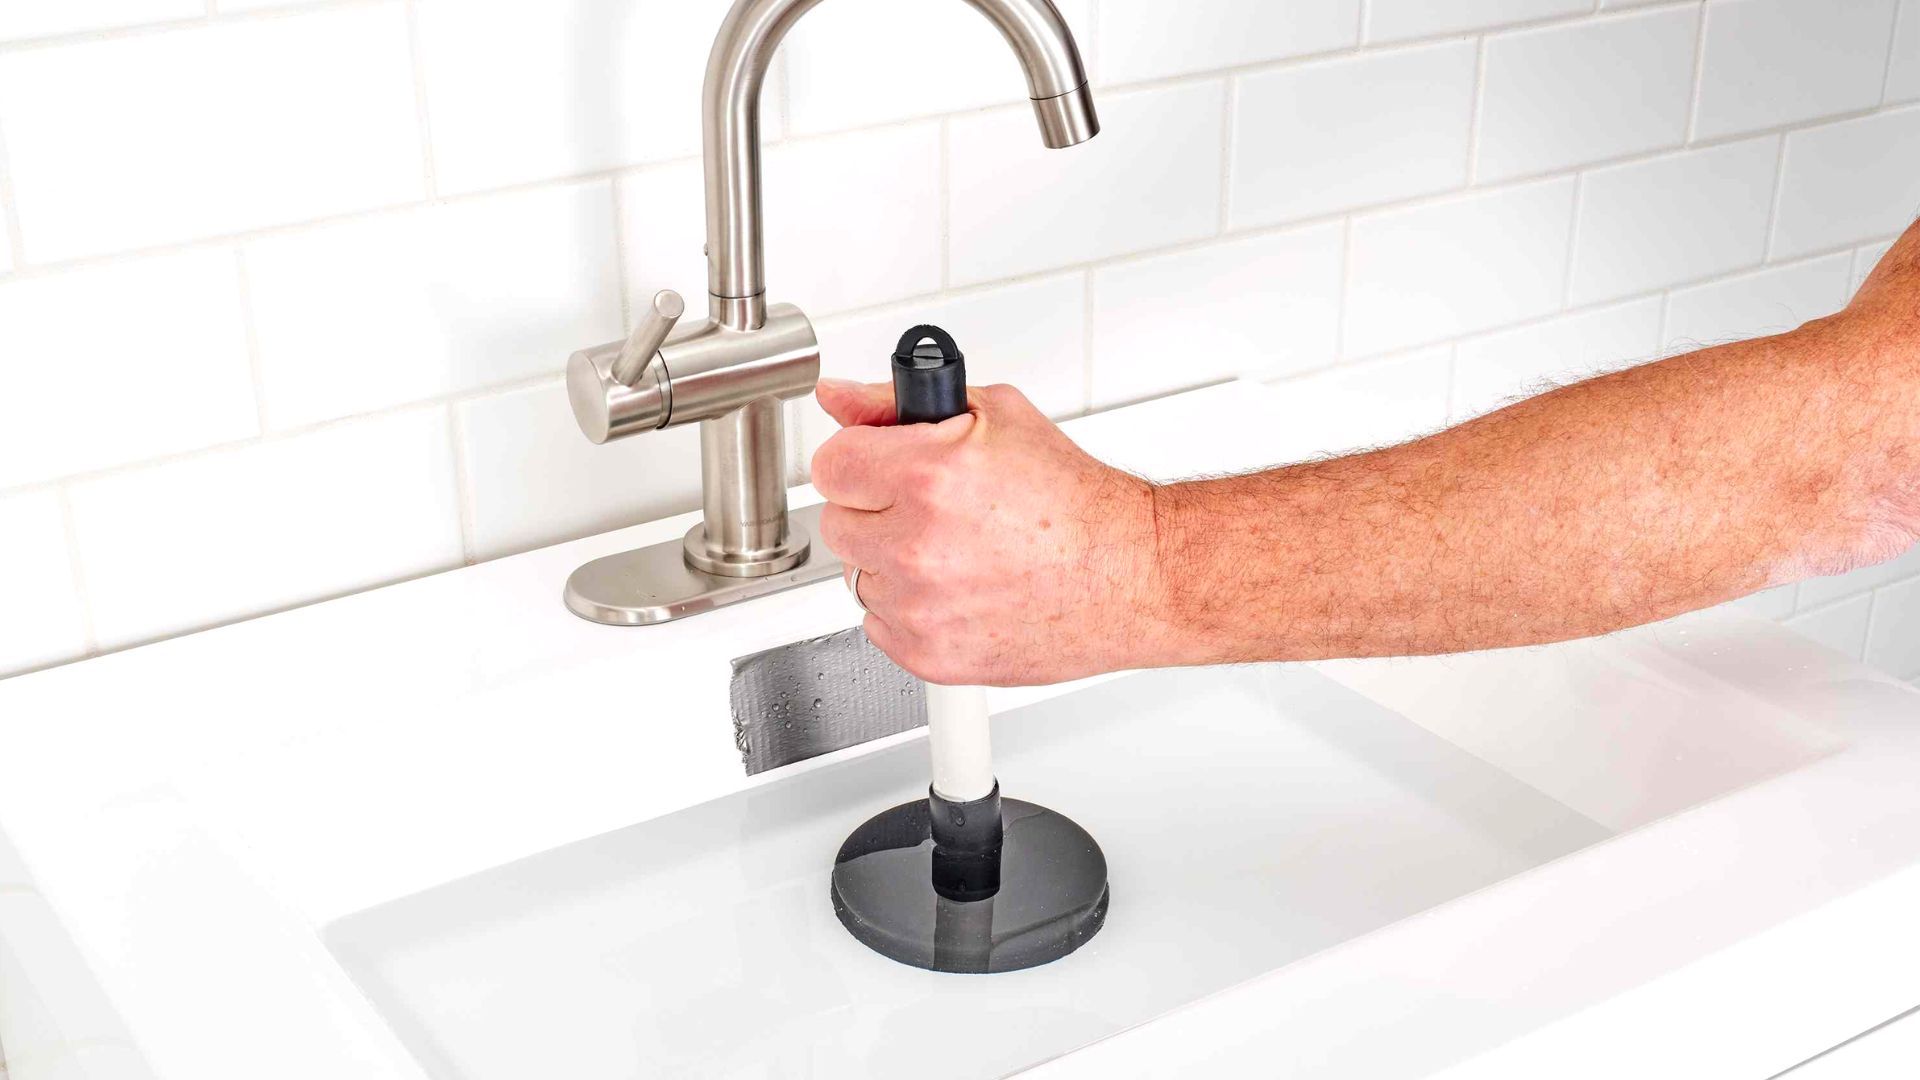 How to Unclog a Bathroom Sink with Sink Stopper